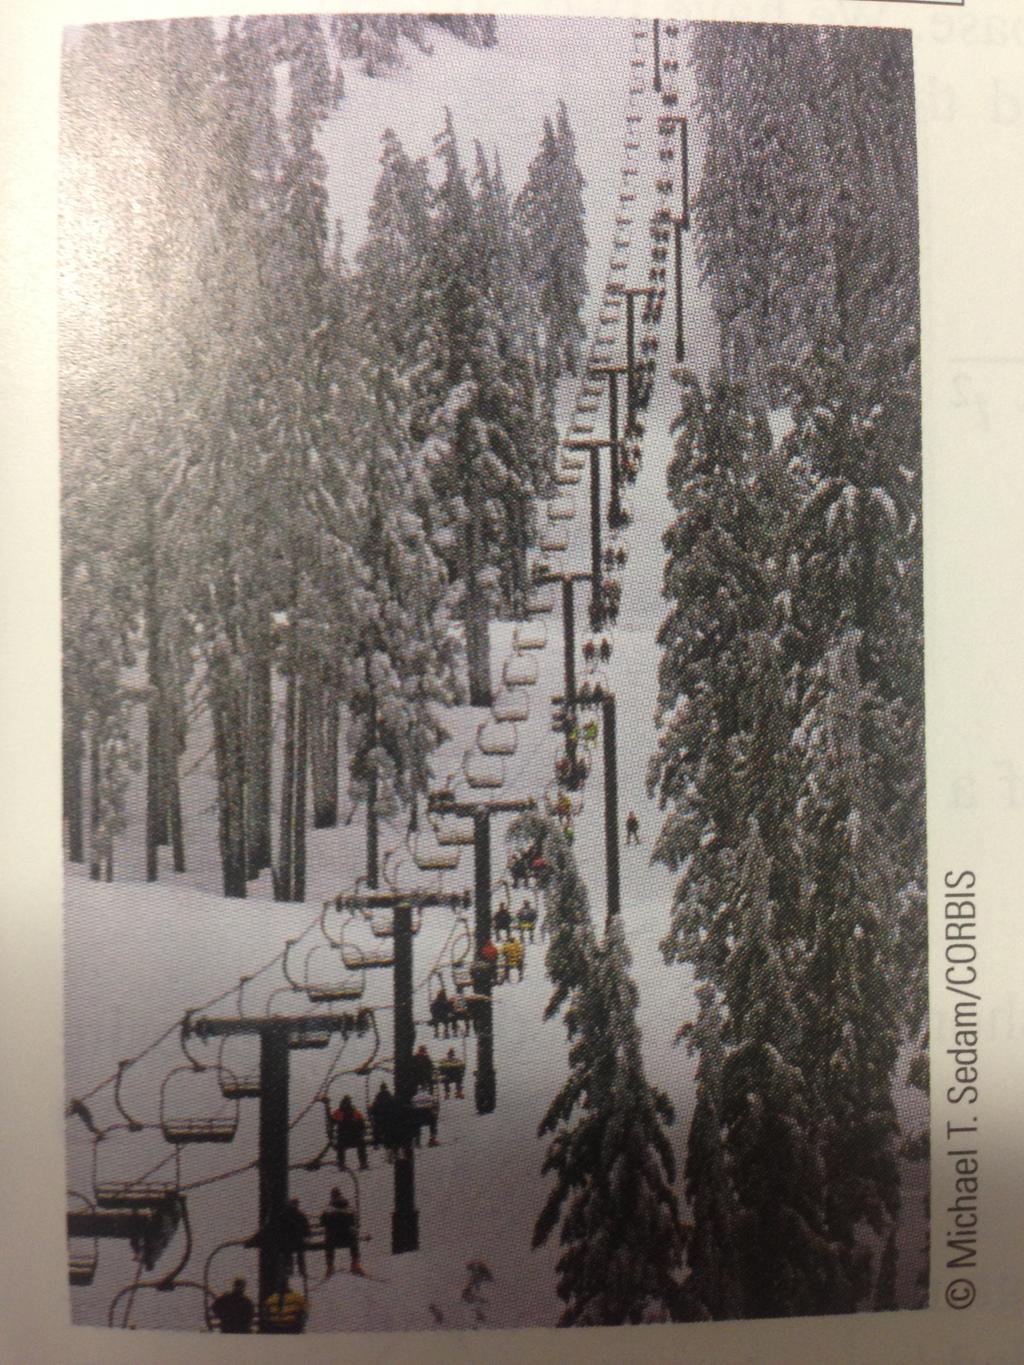 Vertical rise of the Forest Double chair lift (Figure 10) is 1,170 feet and the